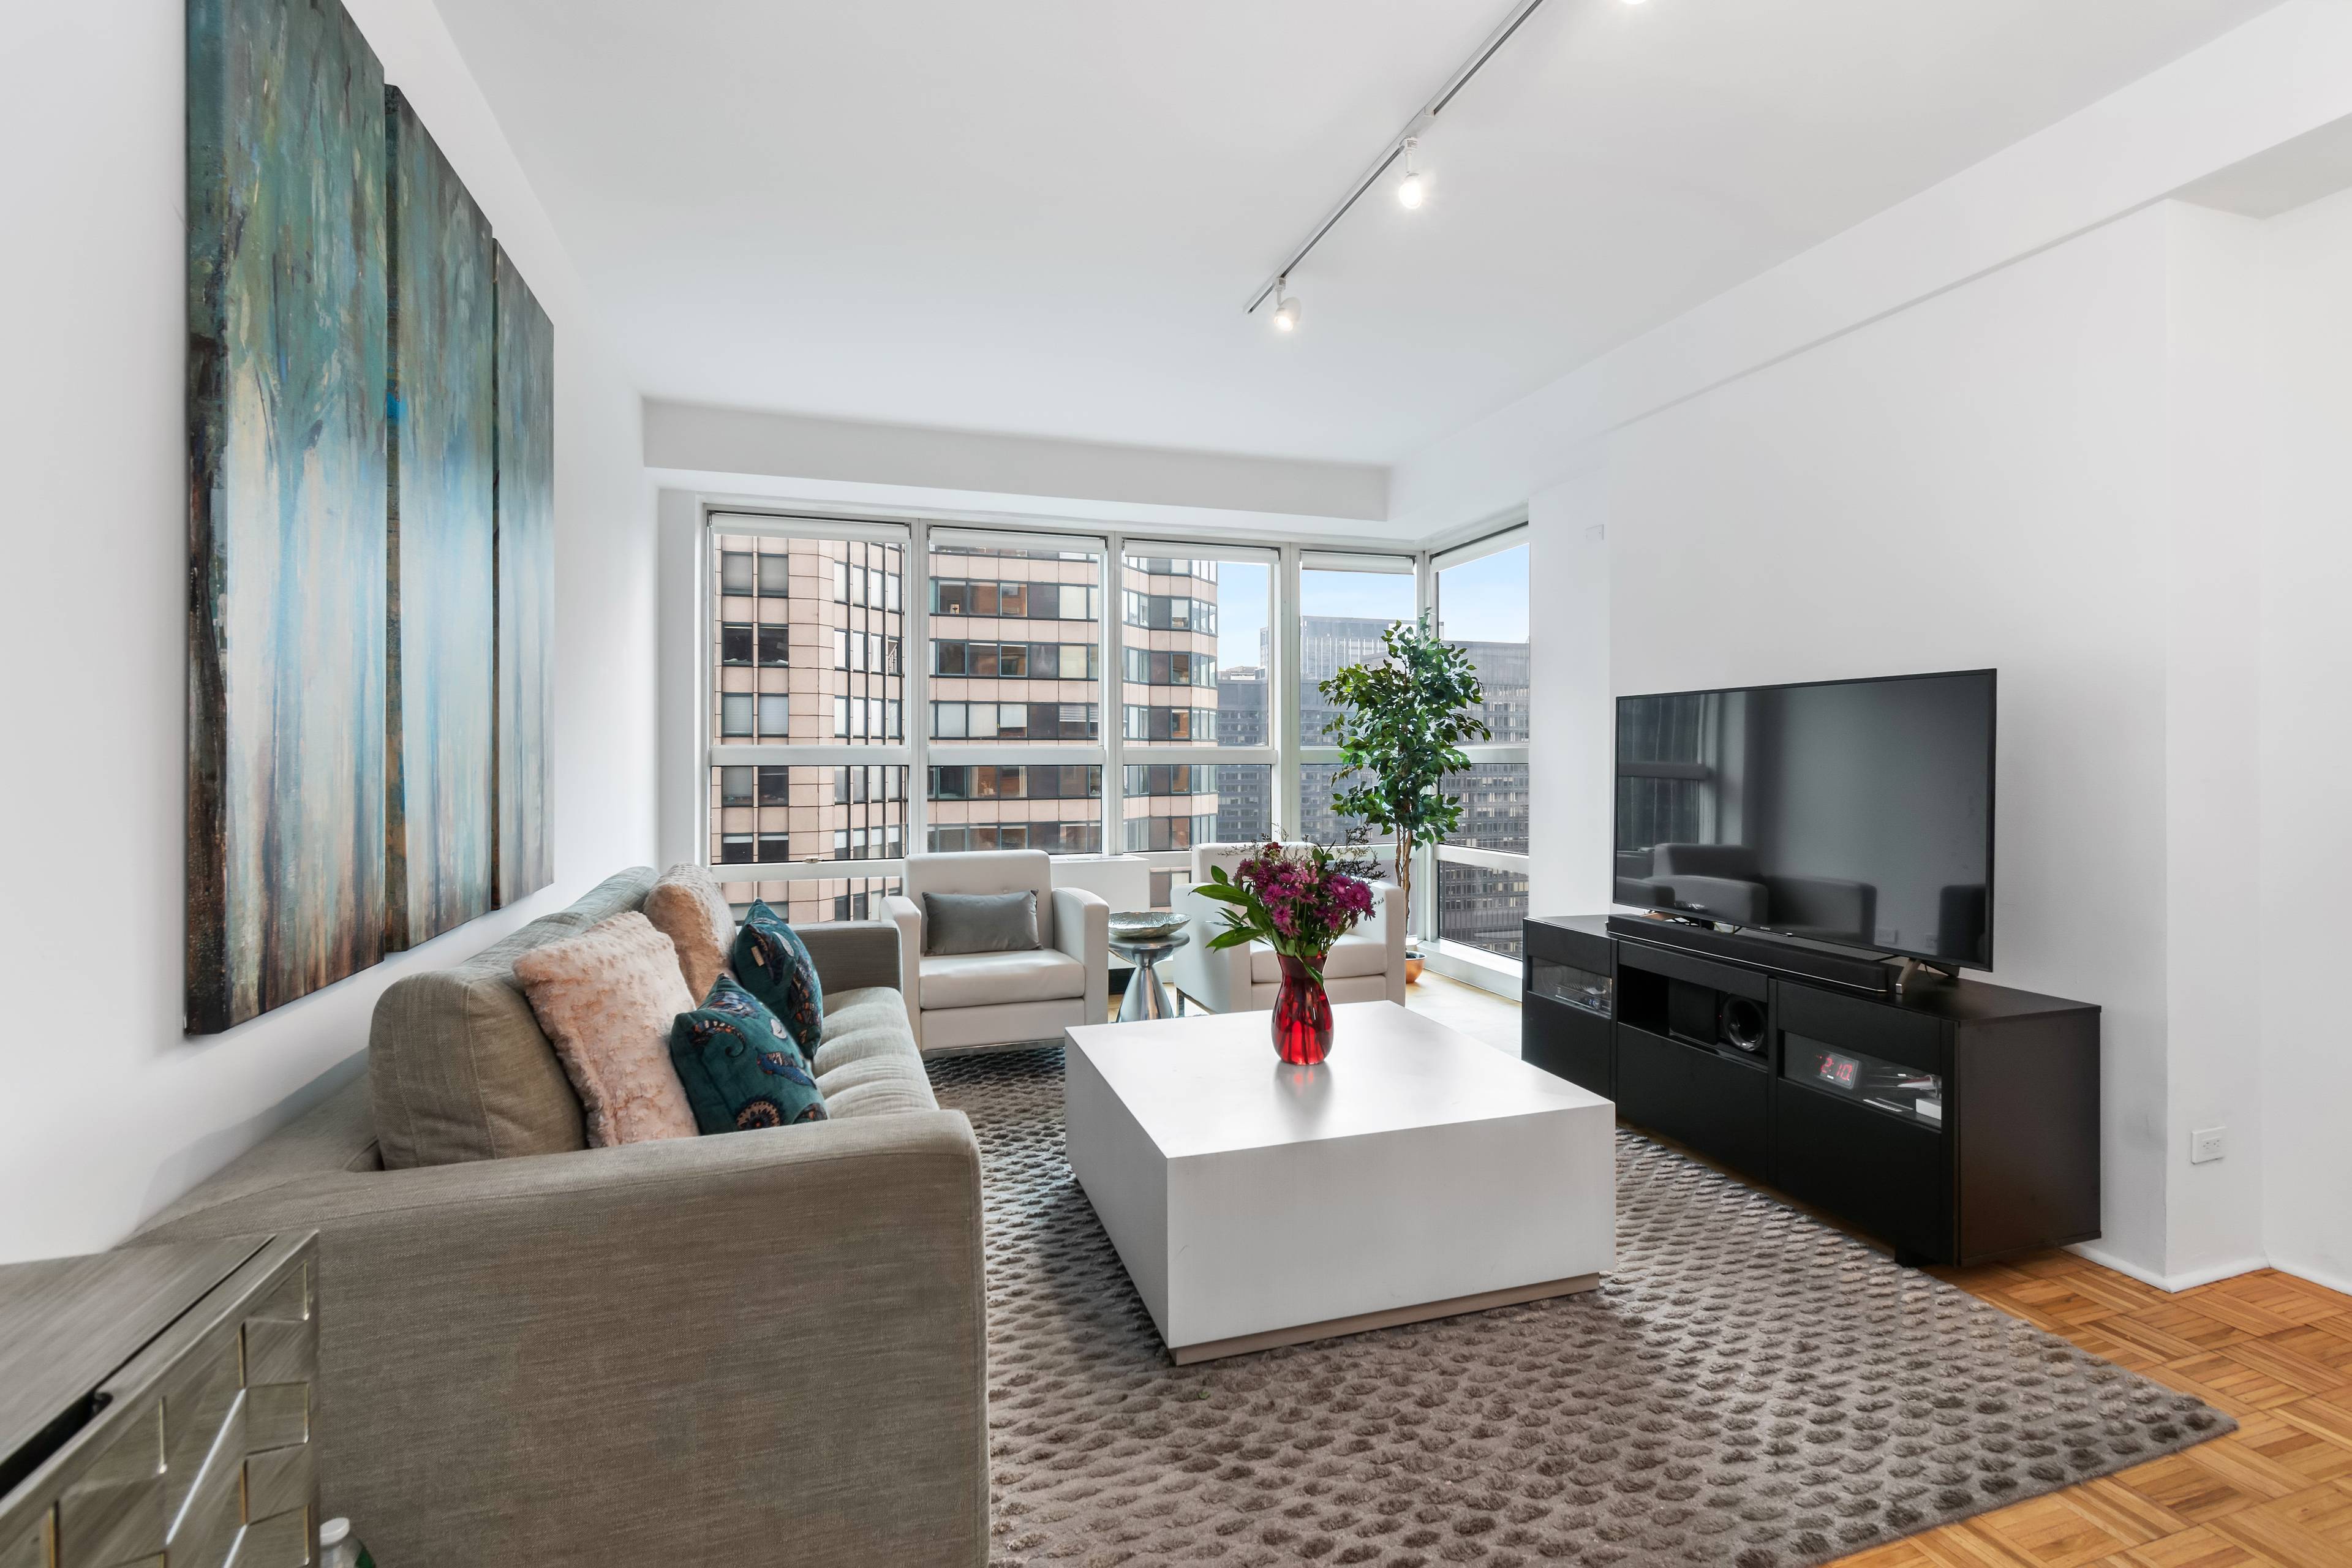 Welcome home to this beautiful corner one bedroom residence, situated on the 53rd floor of one of the most sought after buildings on coveted Billionaire s Row.